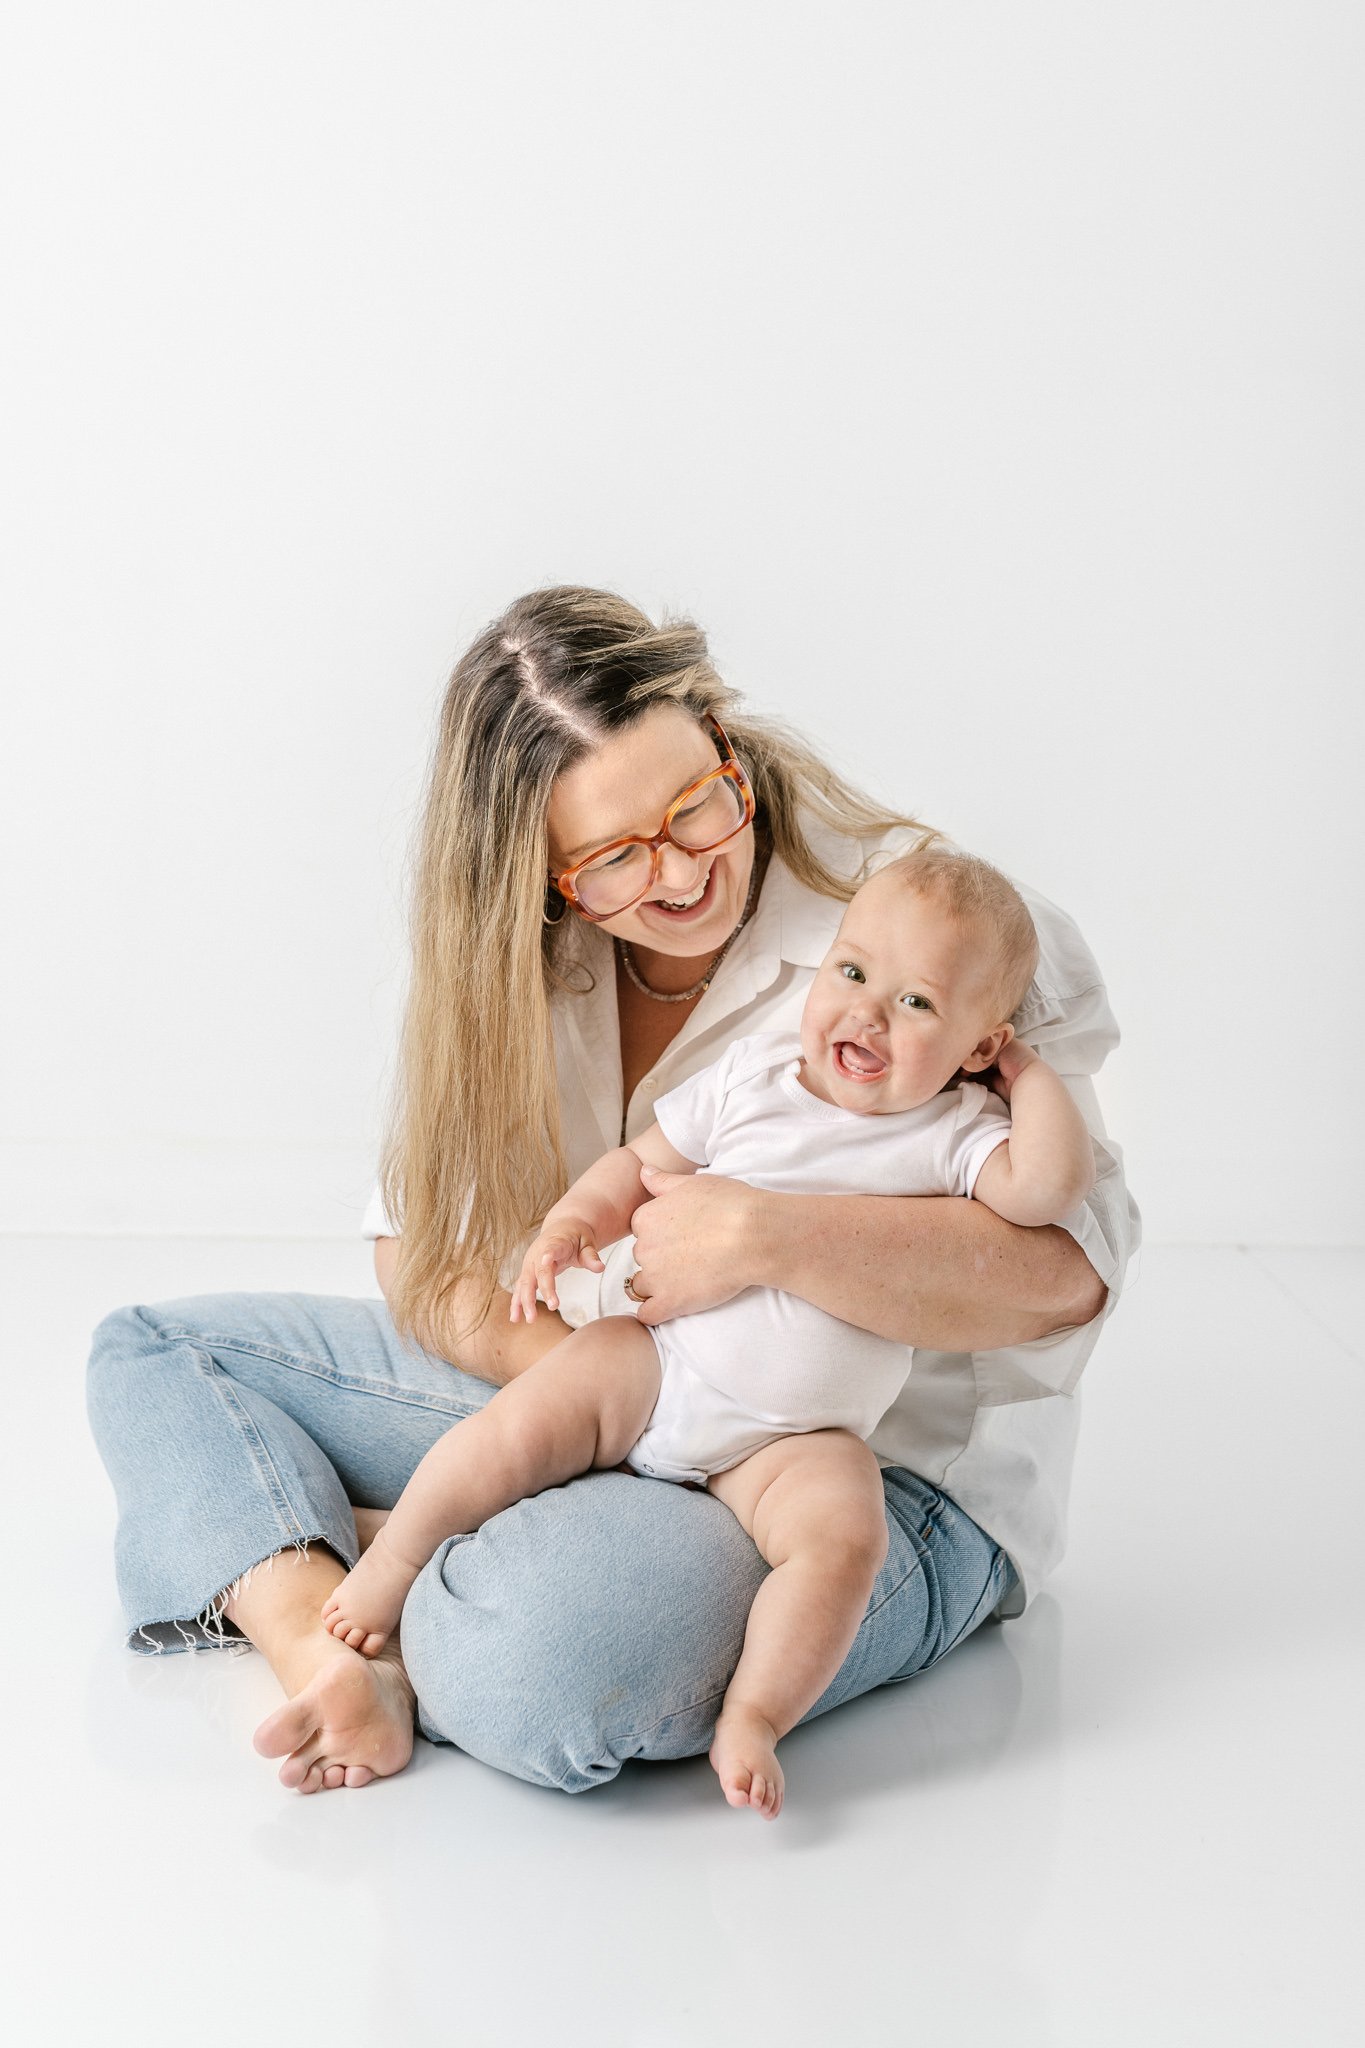  A momma holds her baby as her little girl laughs showing off her big toothy smile and chunky legs by Nicole Hawkins Photography. baby body toothy smile momma mom jeans #NicoleHawkinsPhotography #NicoleHawkinsNewborns #studionewborns #studioportraits